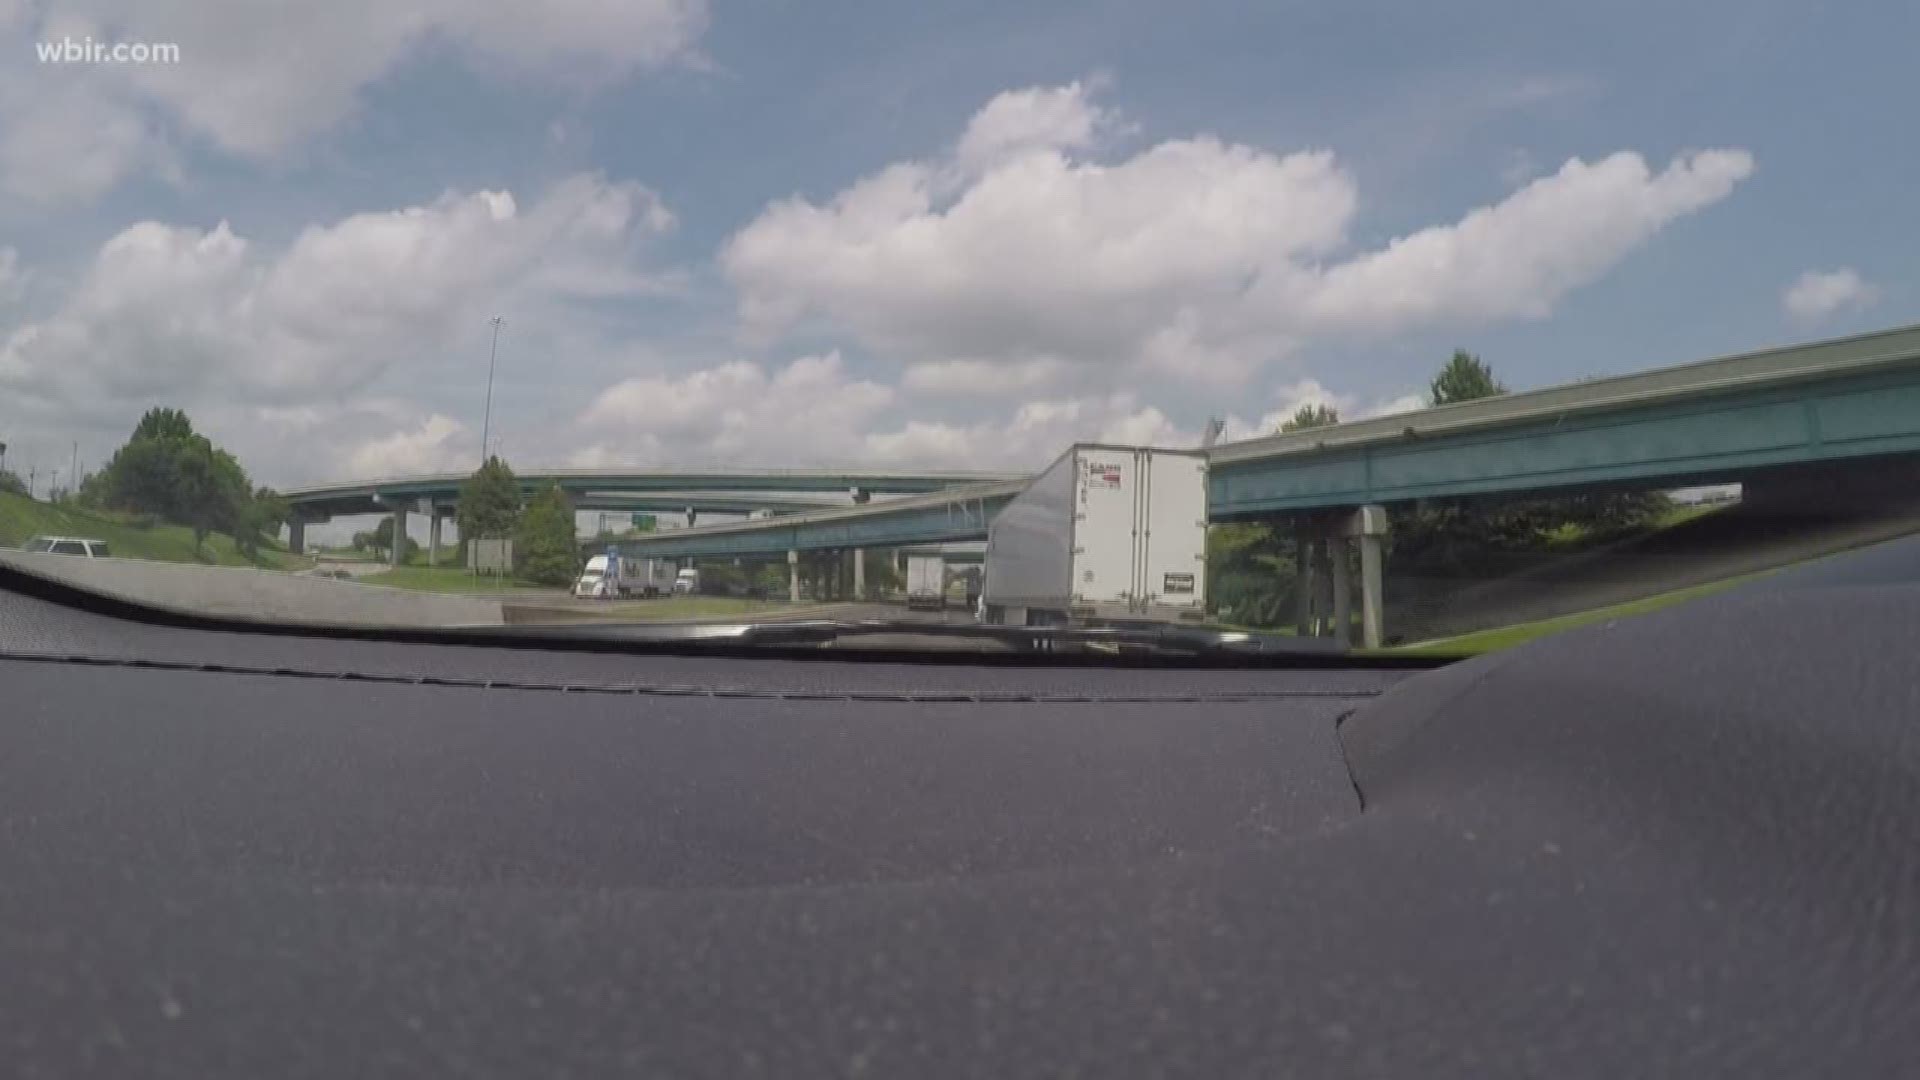 Since July 19th, THP has reported 15 cars damaged by rocks near the Buttermilk Road exit.